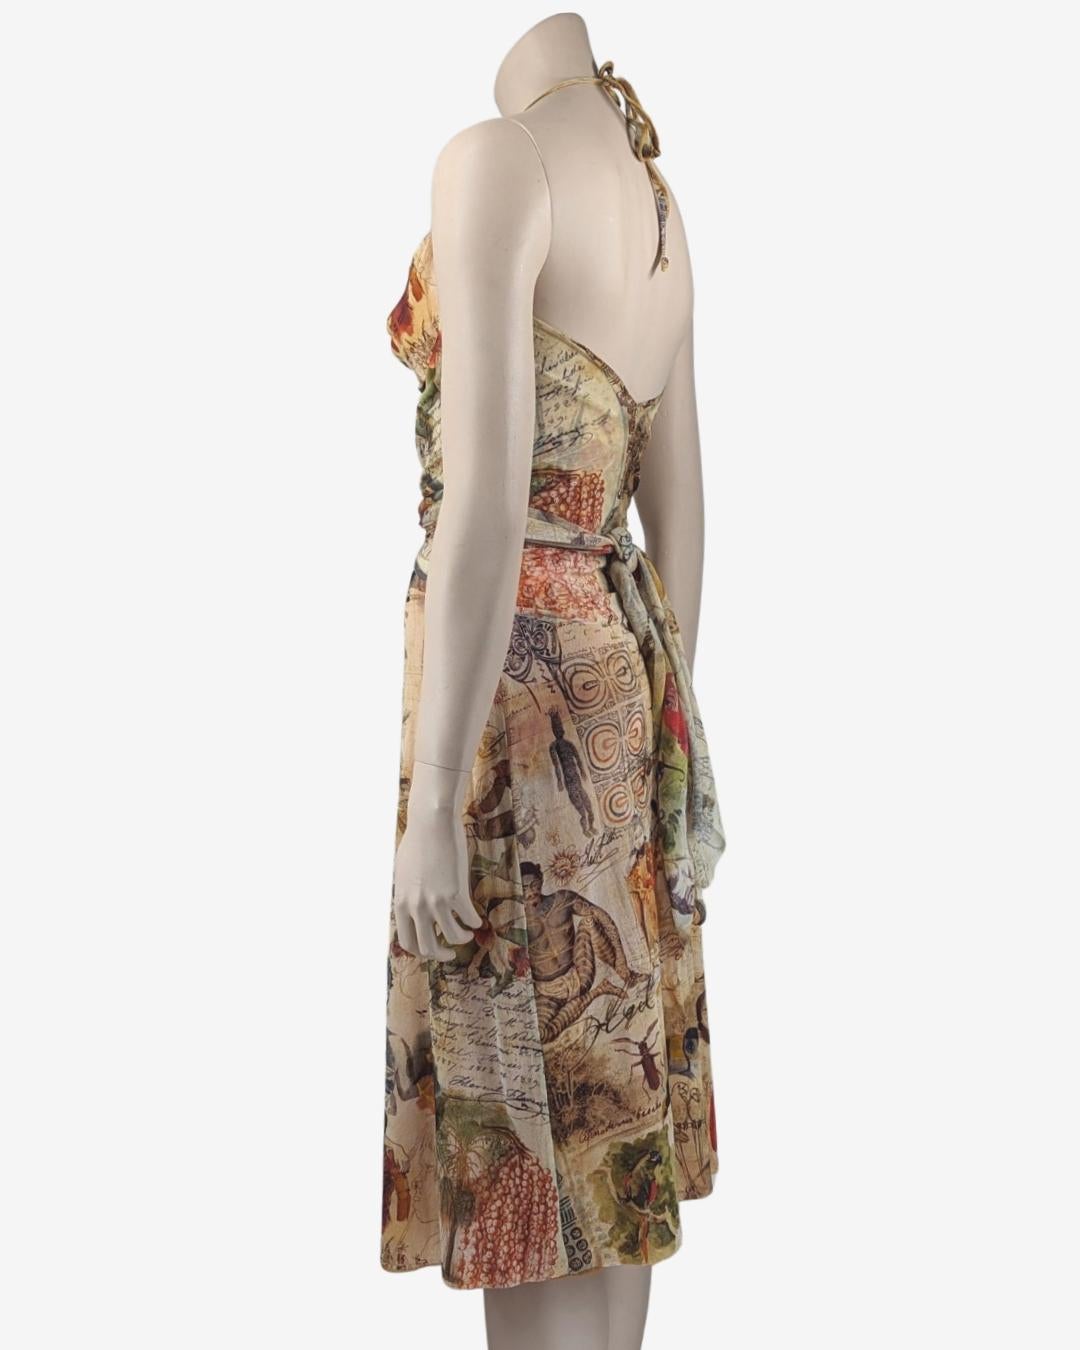 Jean Paul Gaultier Mesh Dress featuring drawings and writtings. 
Rare Tribal Parrot Native Indian detailed print.

. Vintage 90s Gaultier
. Mesh Sheer halter top midi dress
. Can be worn and tied several different ways
. Cowl neckline

Fits S, small